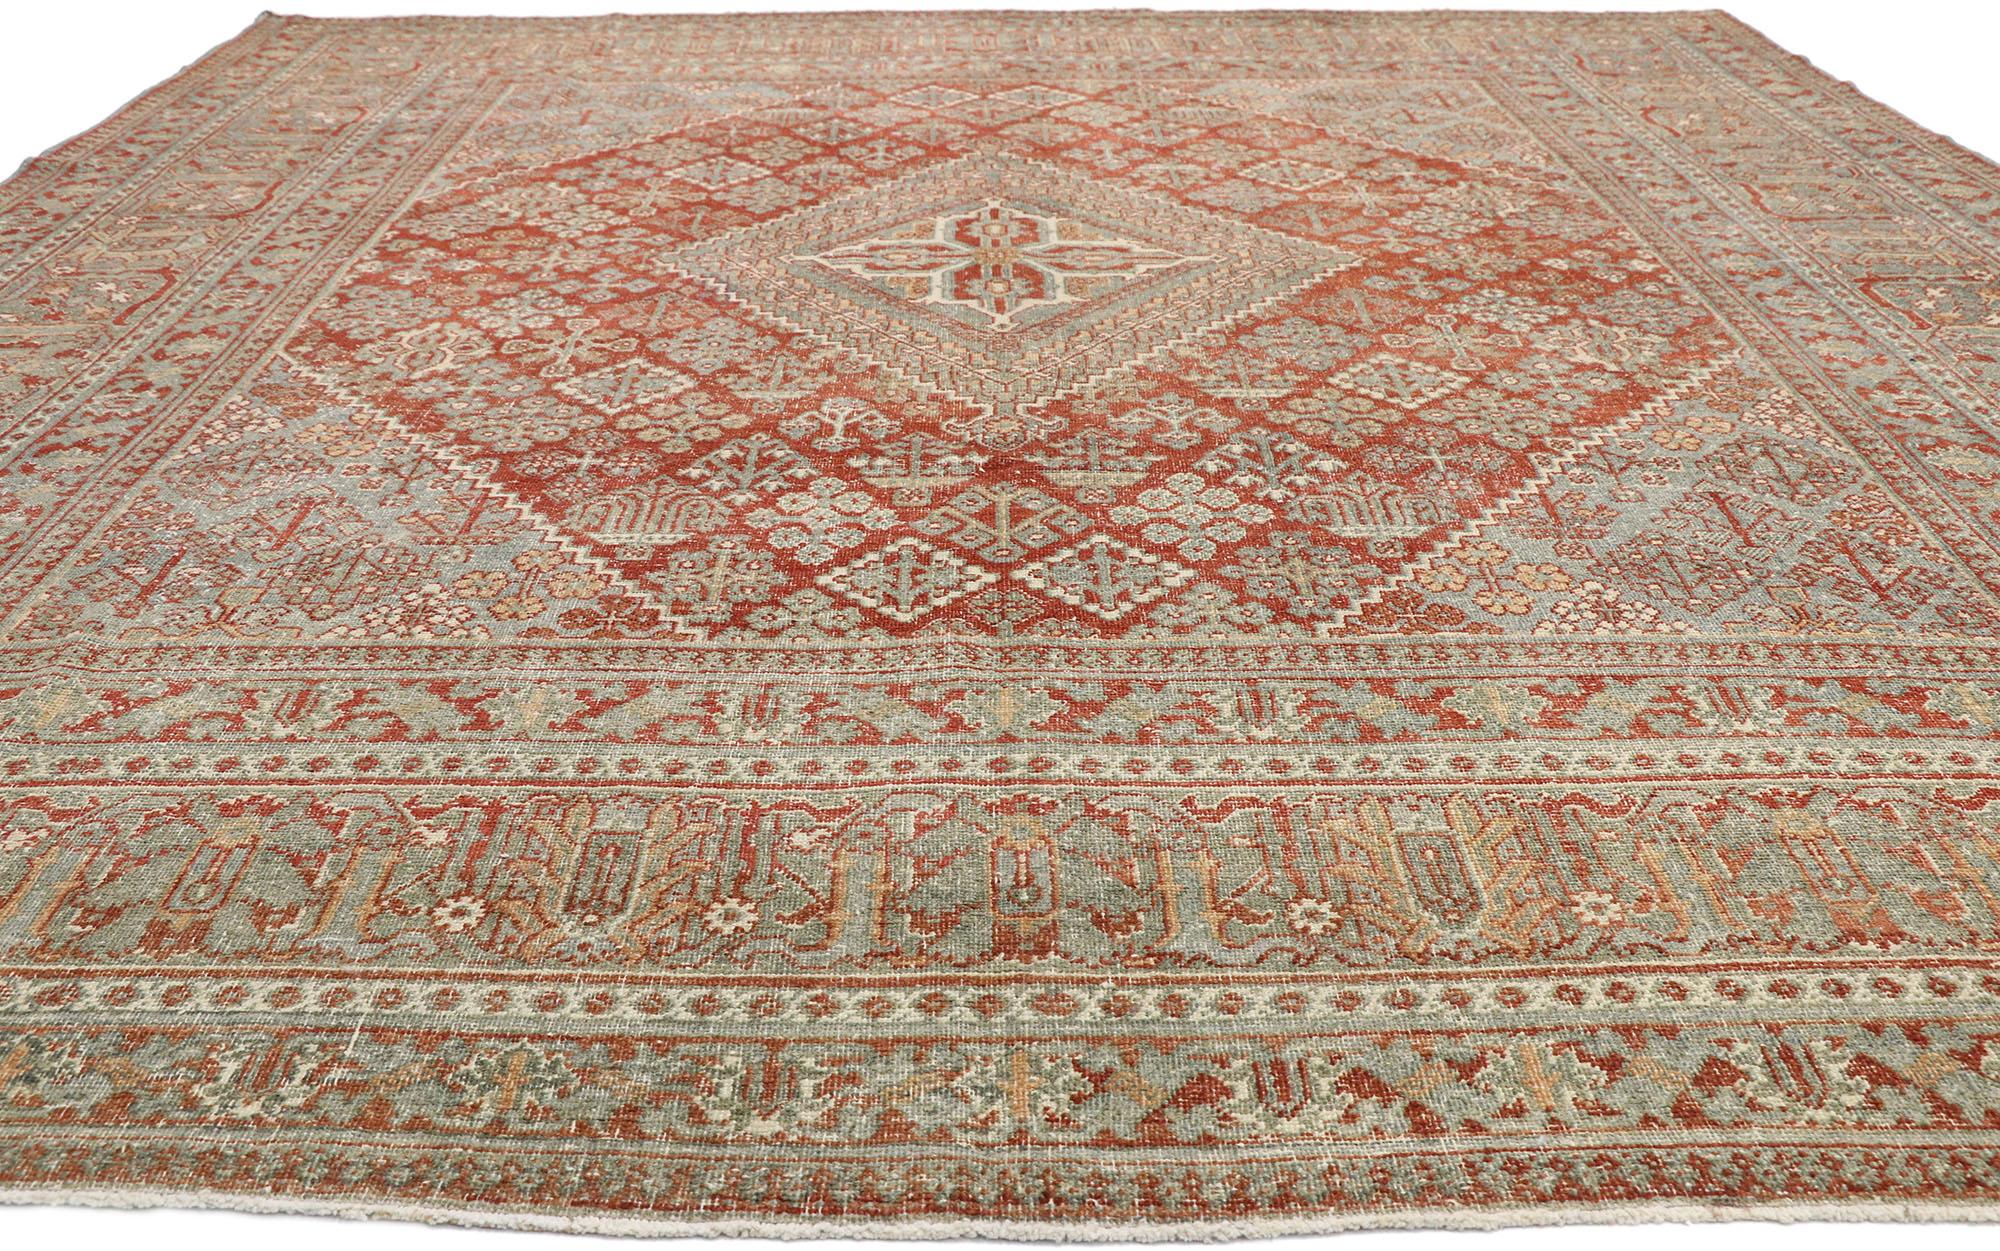 Malayer Distressed Antique Persian Joshegan Design Rug with Relaxed Rustic Federal Style